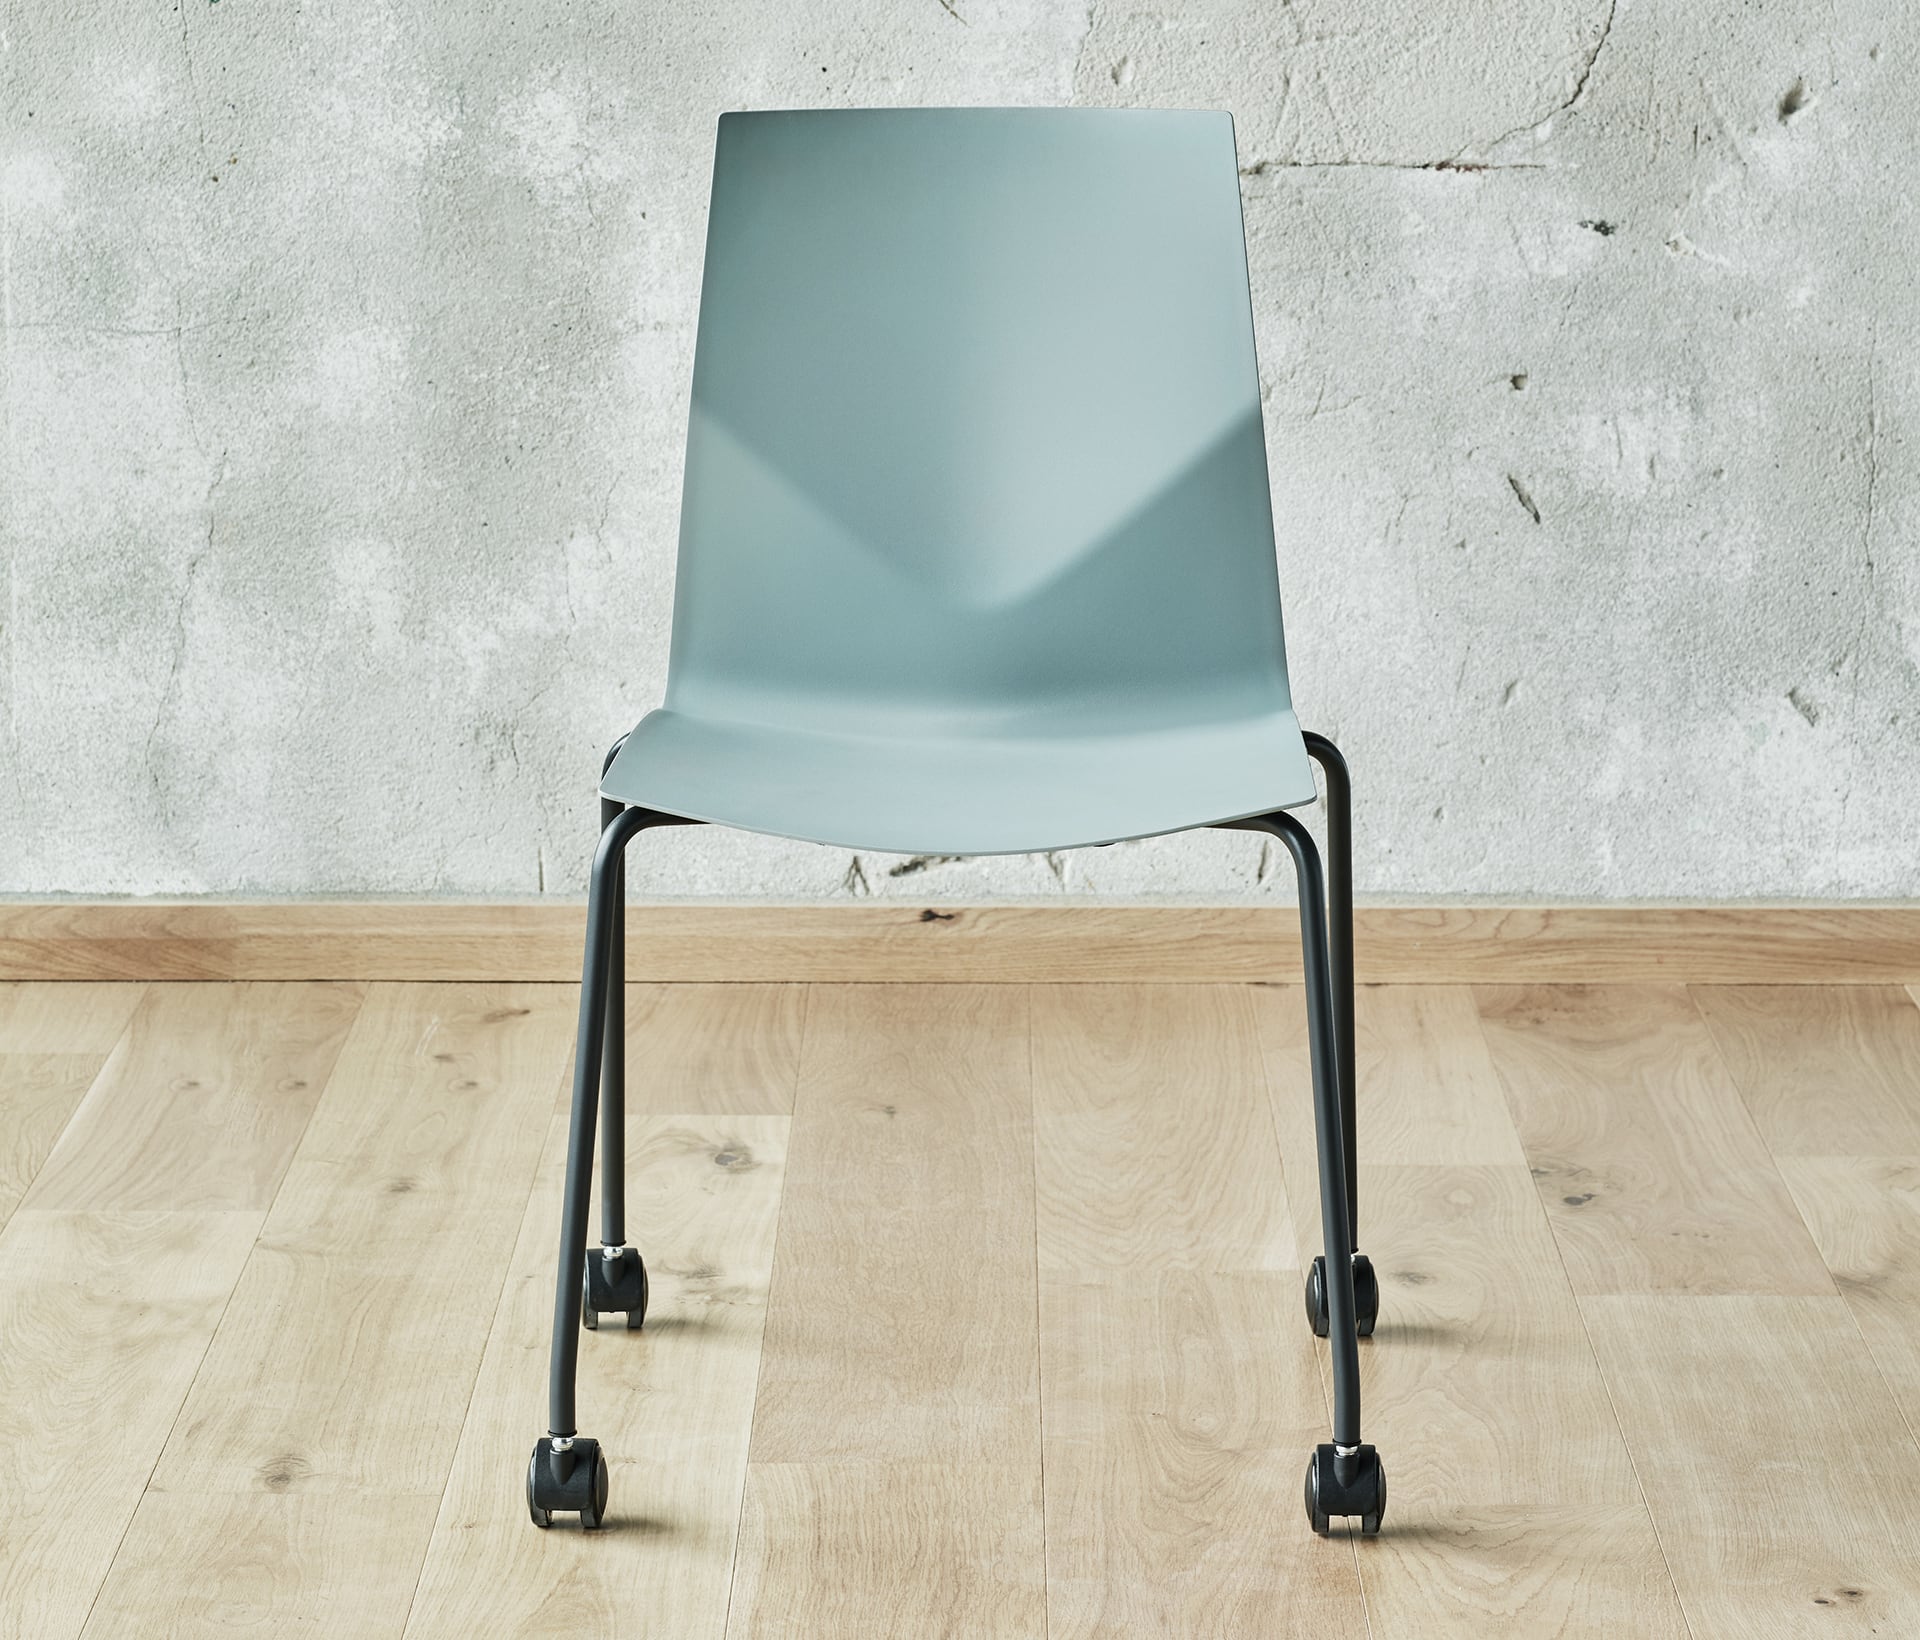 A chair with wheels in front of a wall.